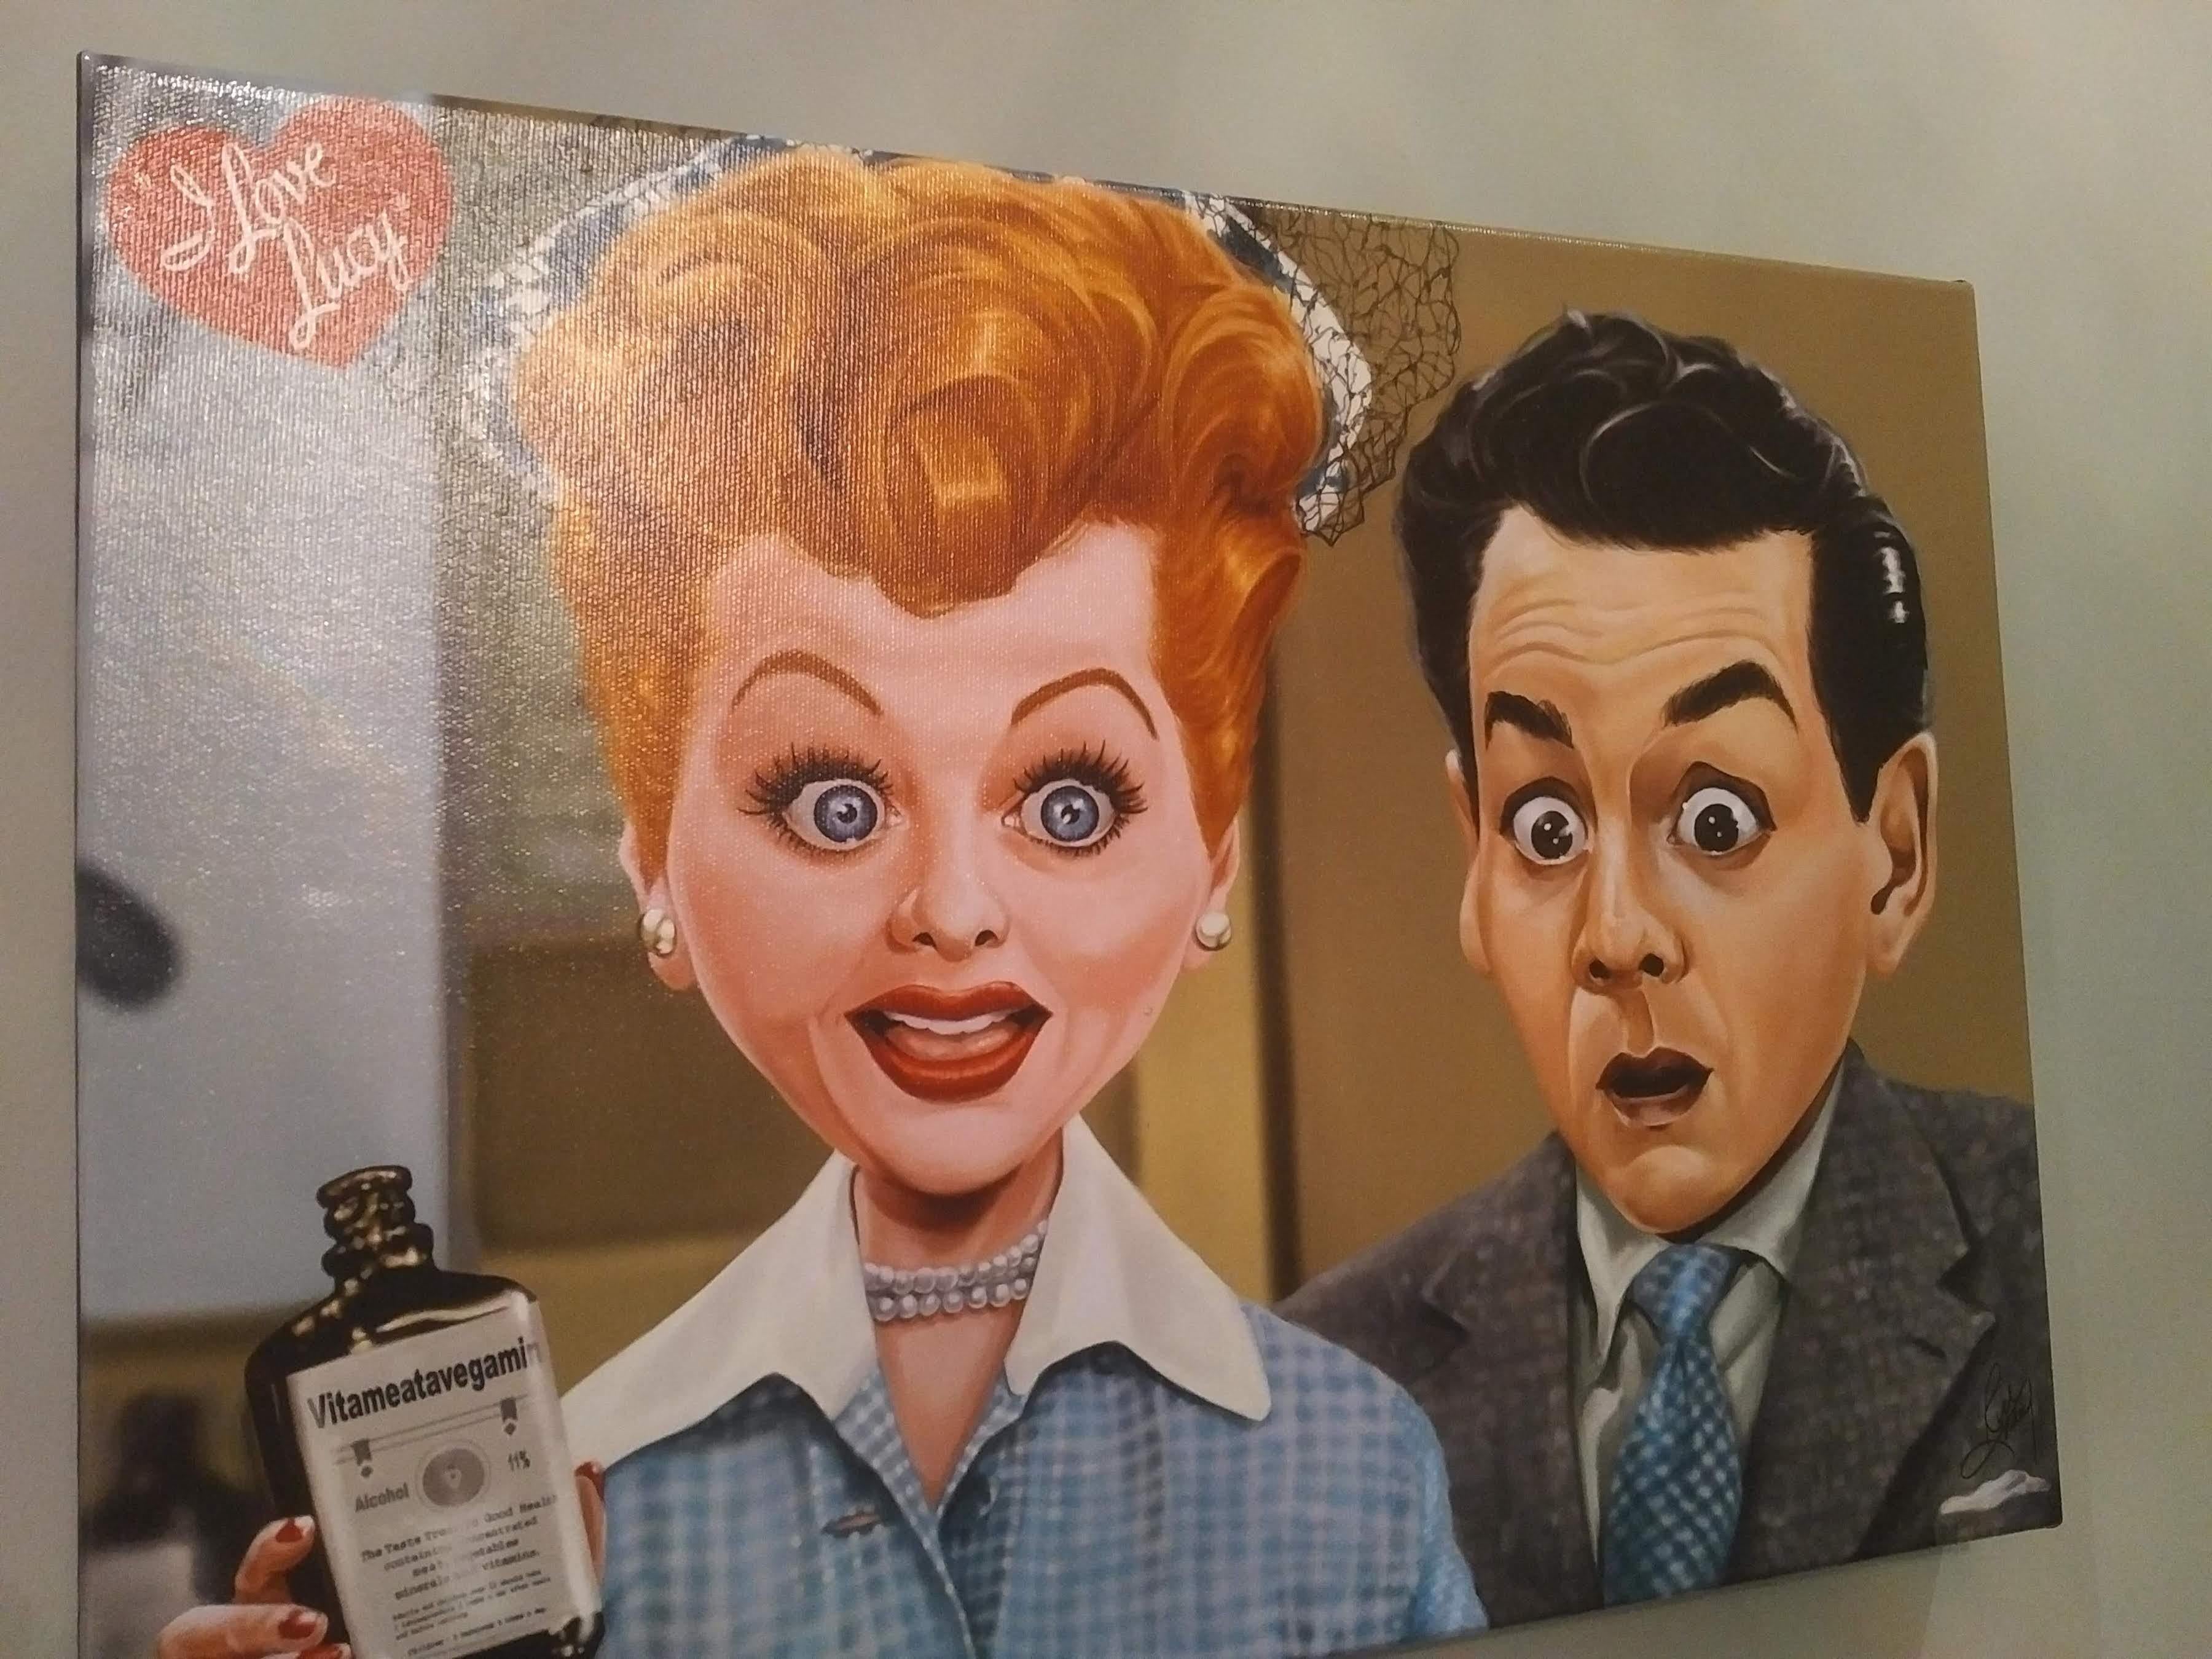 Conley Vitameatavegamin (TM) Licensed I Love Lucy (TM) Giclee #8/40 - Contemporary Print by Rich Conley